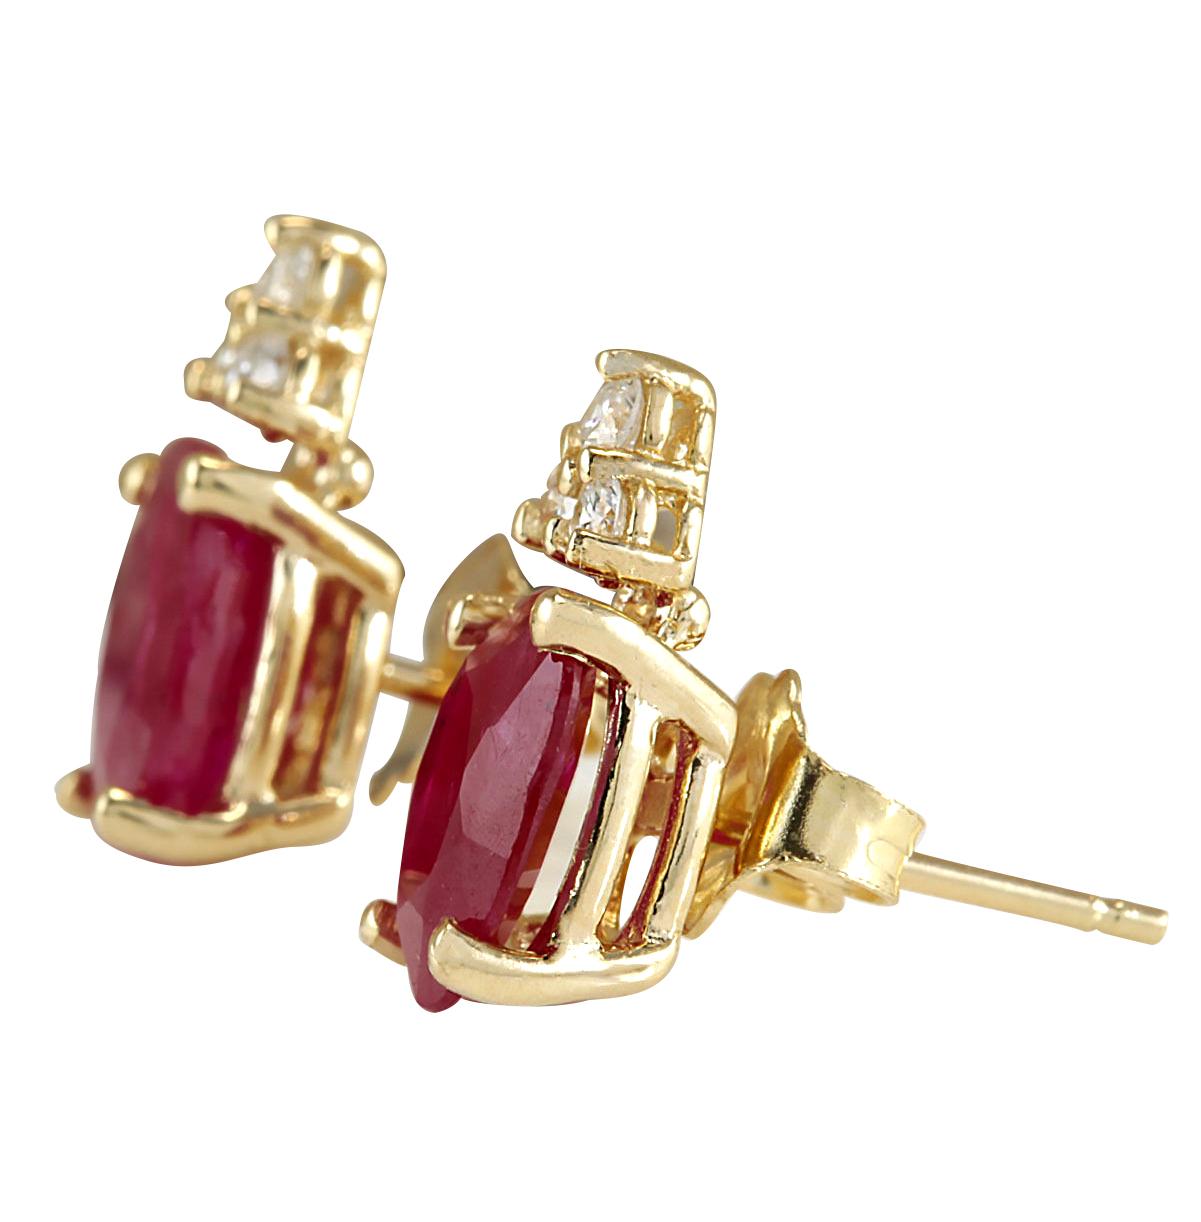 Stamped: 14K Yellow Gold
Total Earrings Weight: 2.0 Grams
Total Natural Ruby Weight is 2.90 Carat (Measures: 8.00x6.00 mm)
Color: Red
Total Natural Diamond Weight is 0.20 Carat
Color: F-G, Clarity: VS2-SI1
Face Measures: 12.40x5.90 mm
Sku: [702935W]